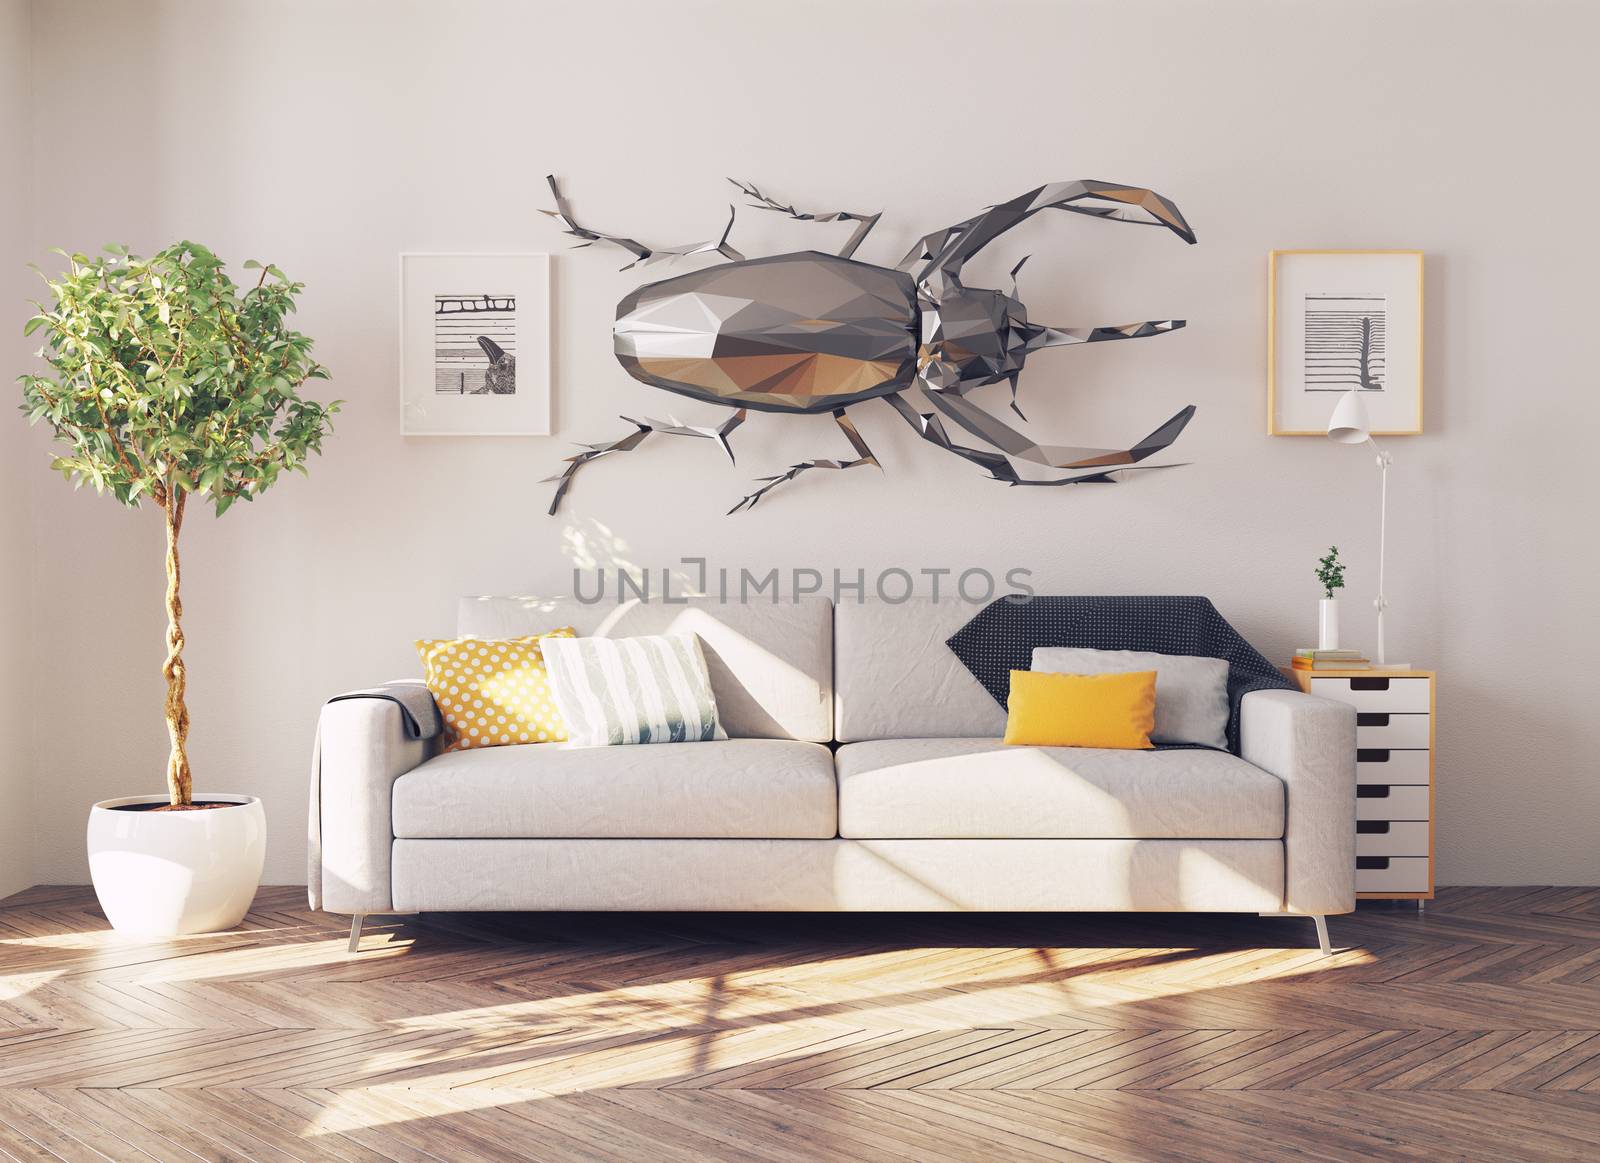 the rhino beetle in the living room as a decor. 3d concept